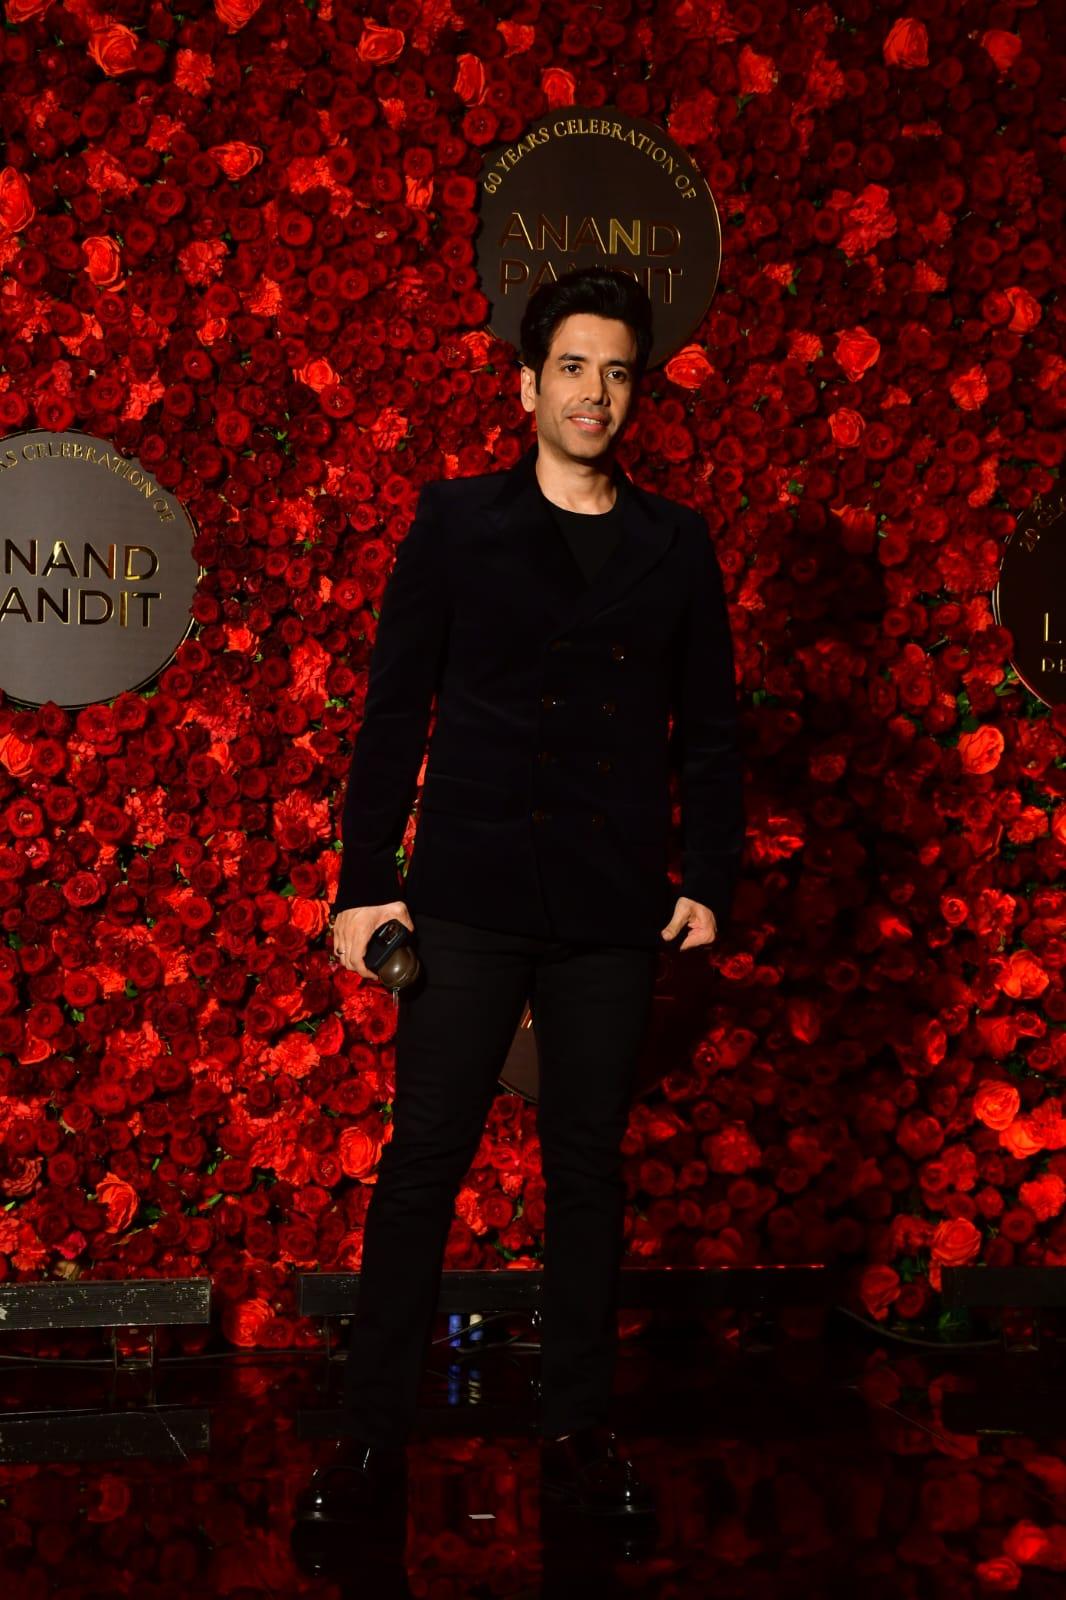 Tusshar Kapoor posed for the cameras in a black suit as he walked the red carpet